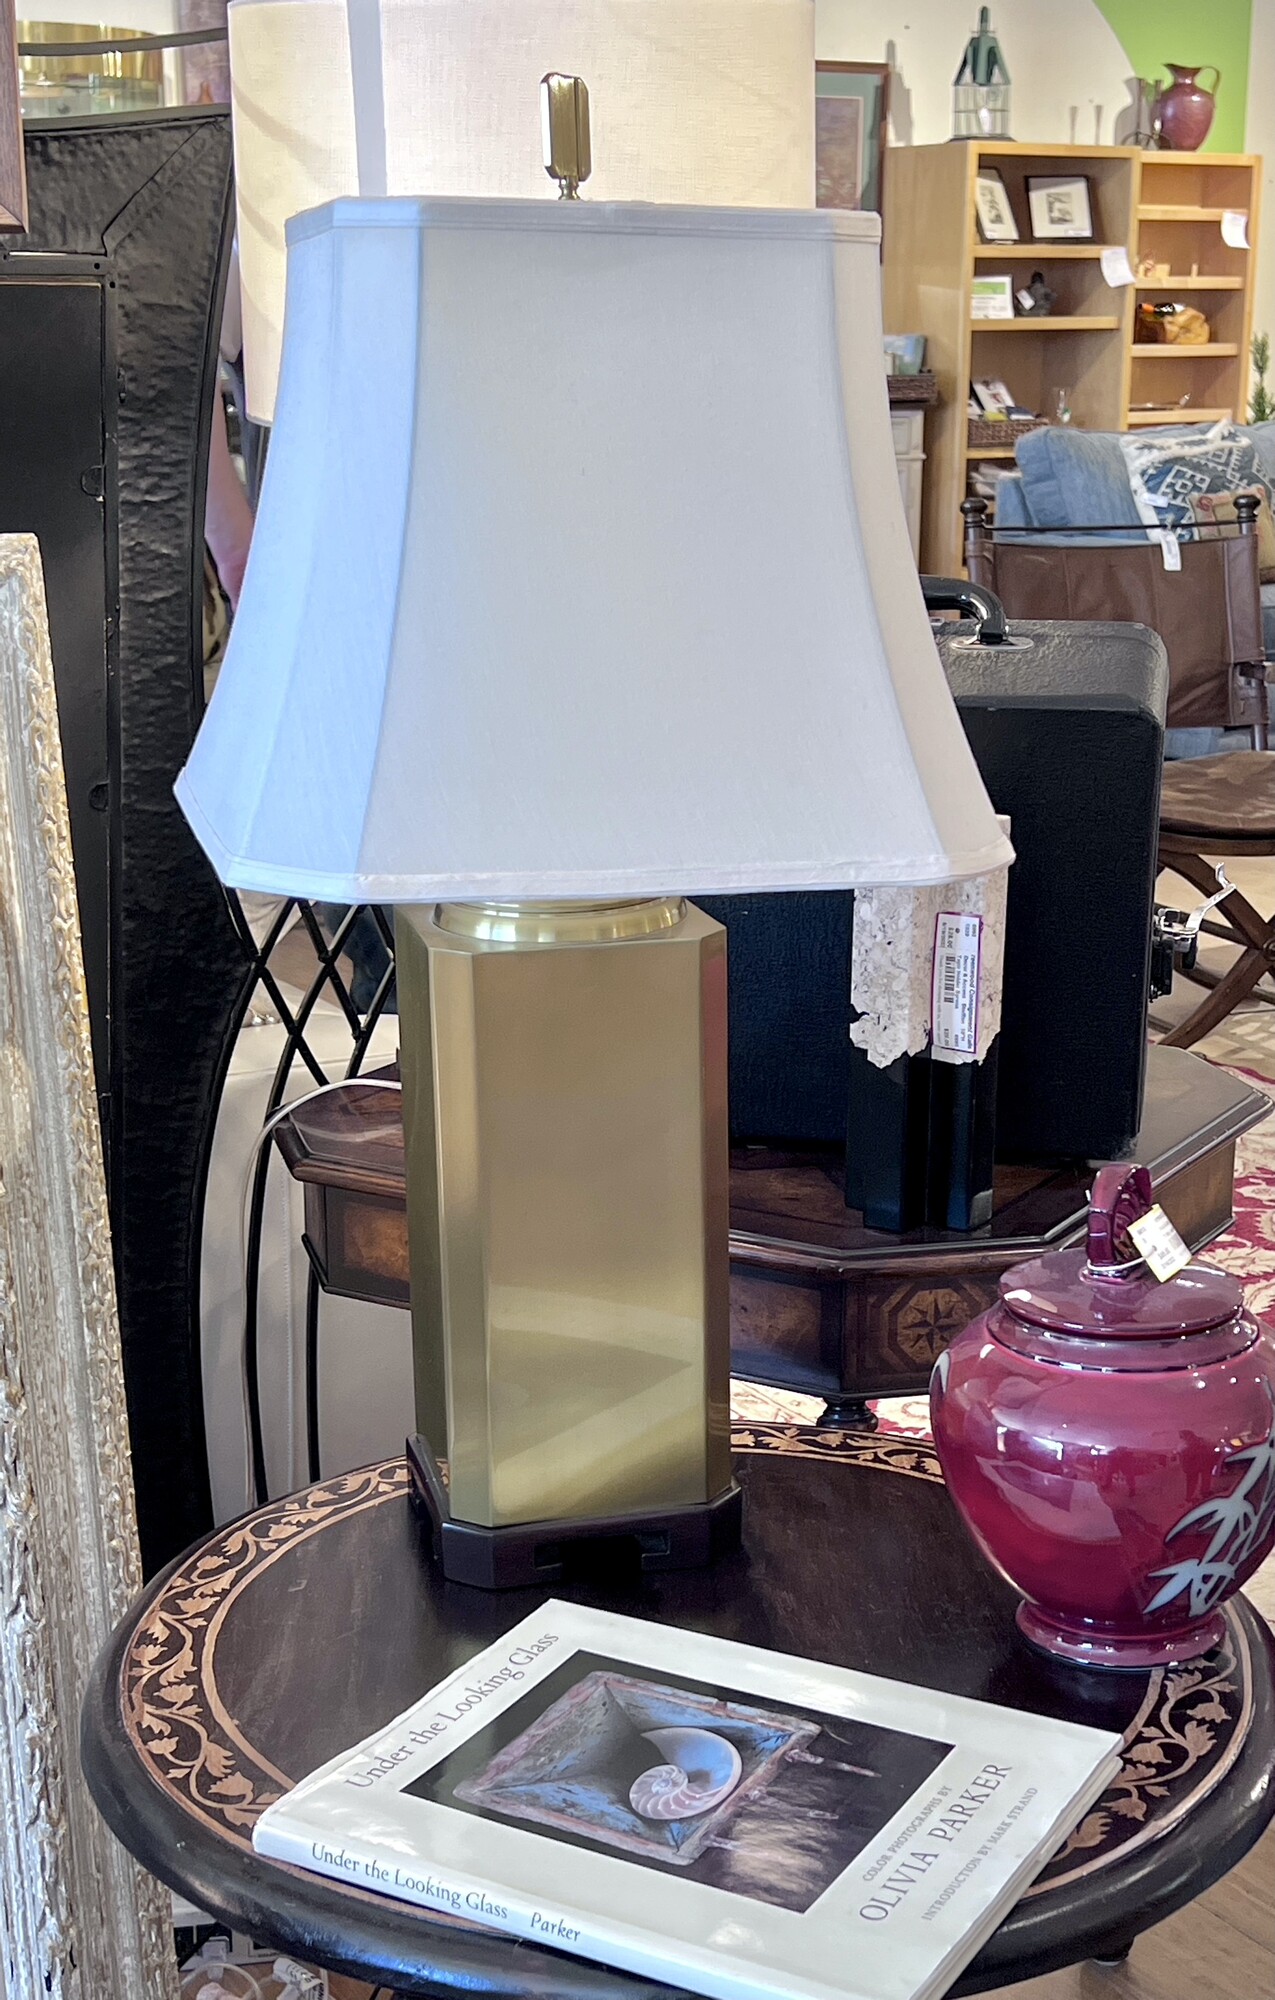 Brass Table Lamp
Size: 30 H